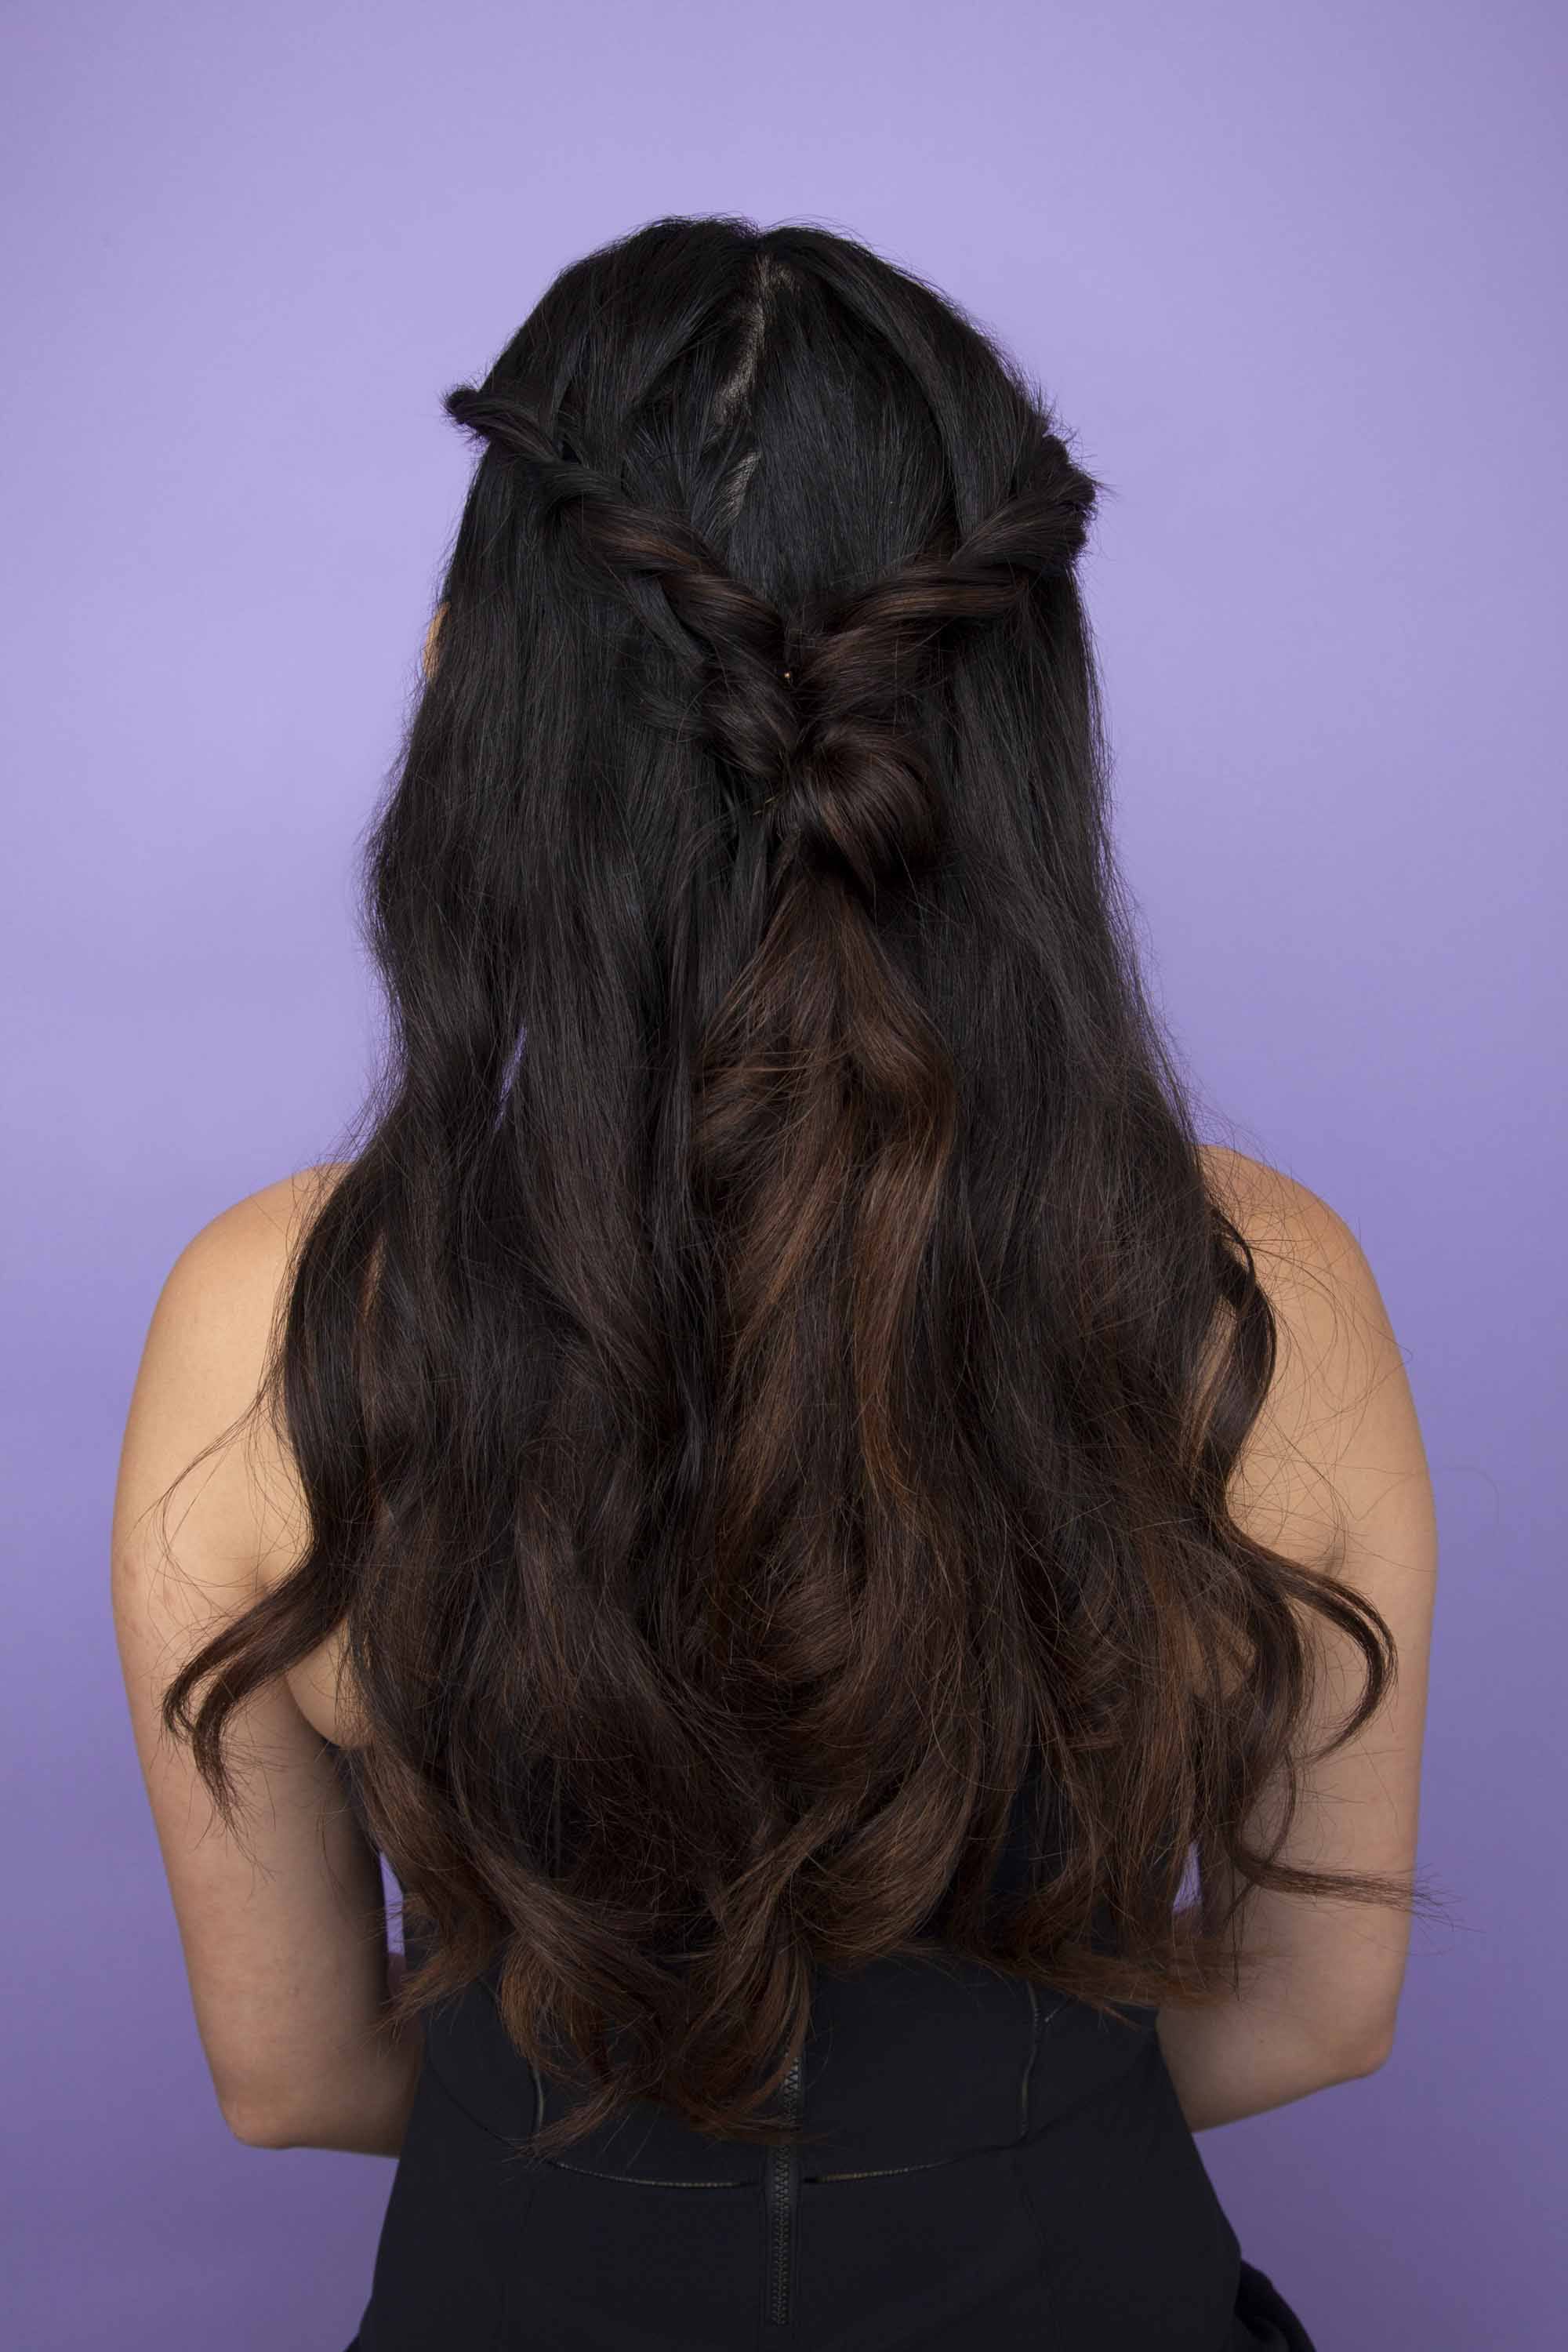 Diwali hairstyles: Back view of a woman with long dark hair wearing a half up half down twist hairstyle